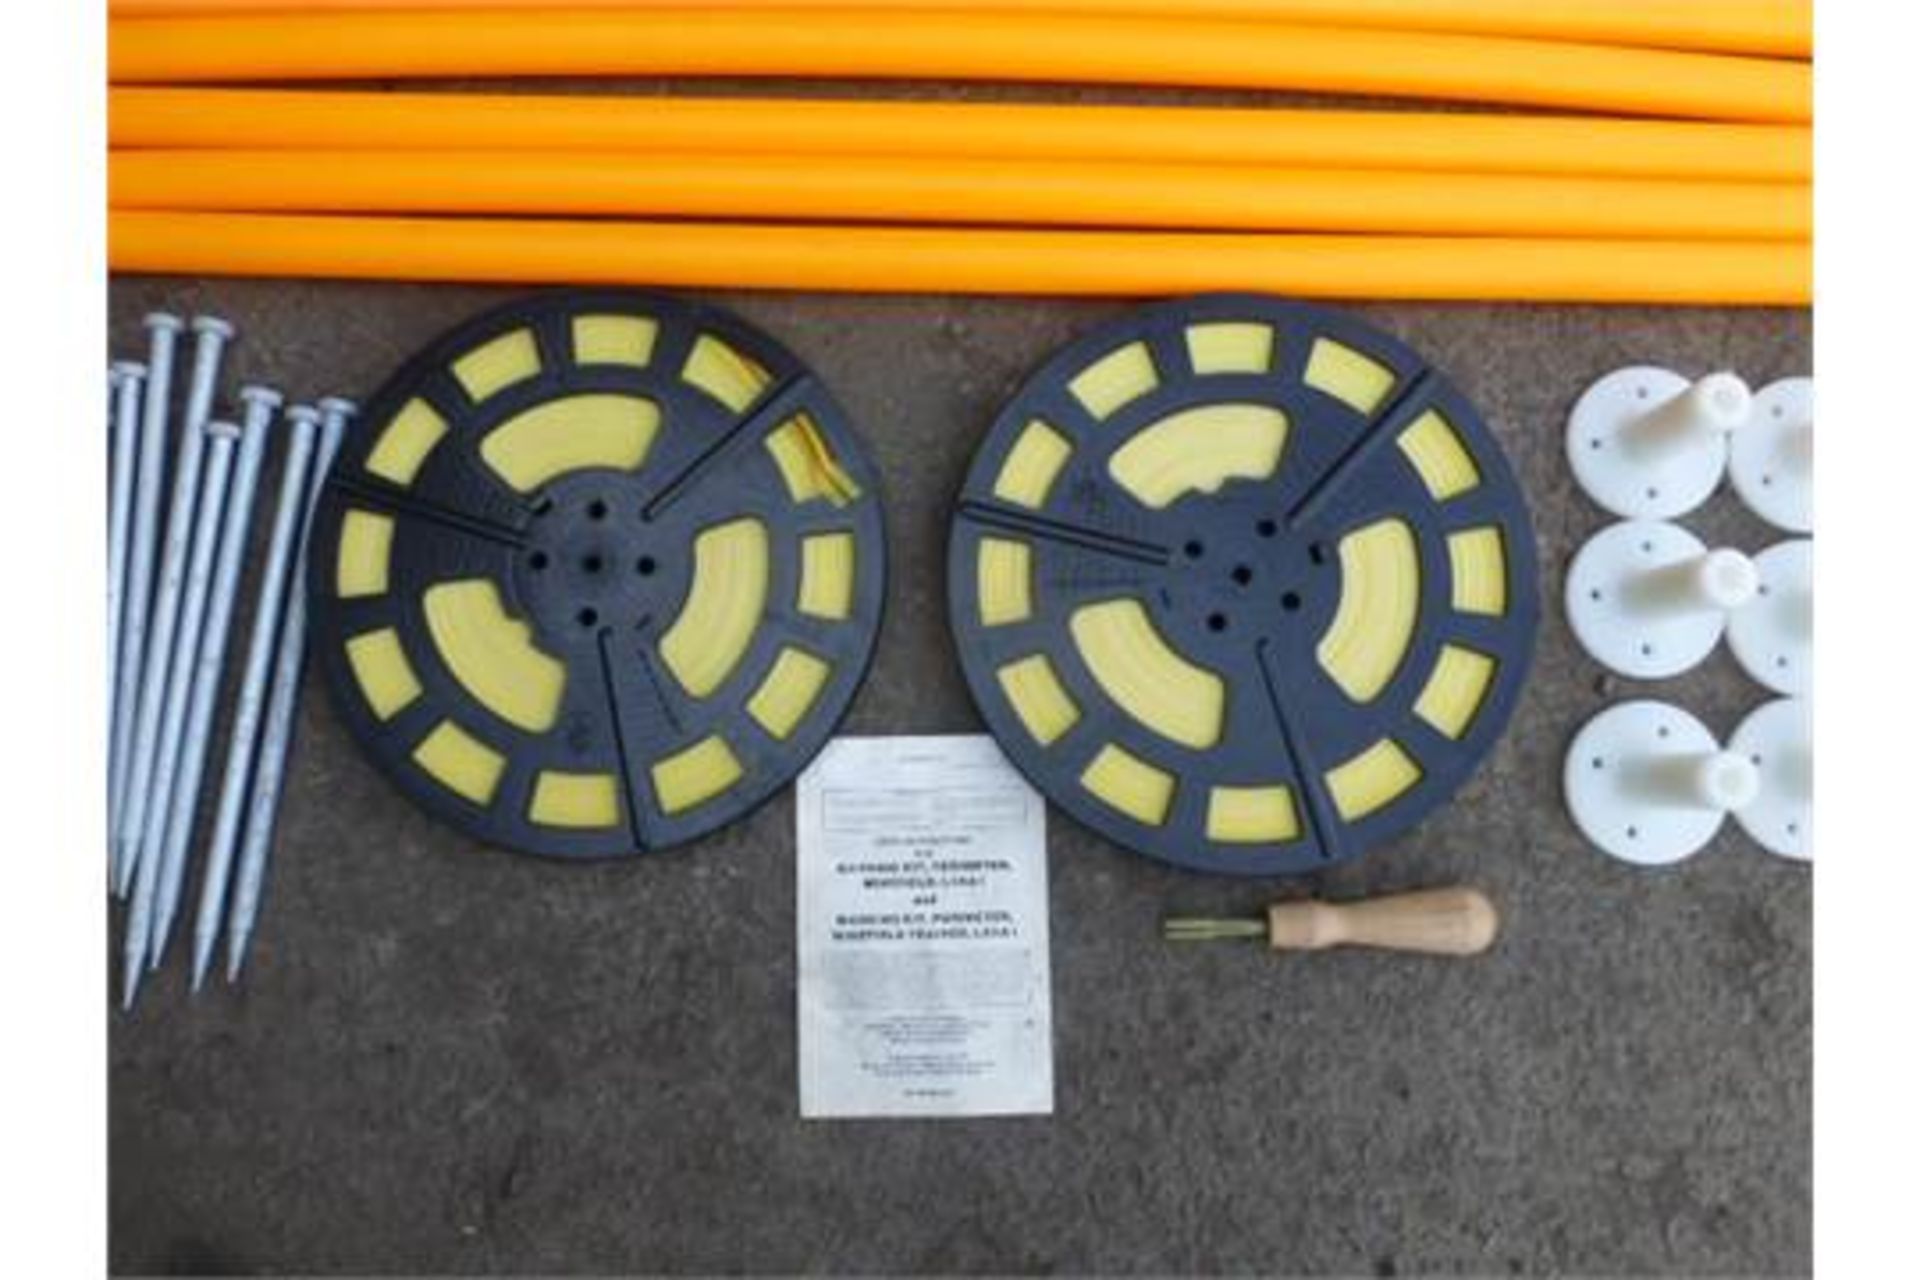 Perimeter Marking Kit complete with 2 x 125m Tape Spools, Posts, Ground Spikes, Base Plates etc - Image 2 of 9